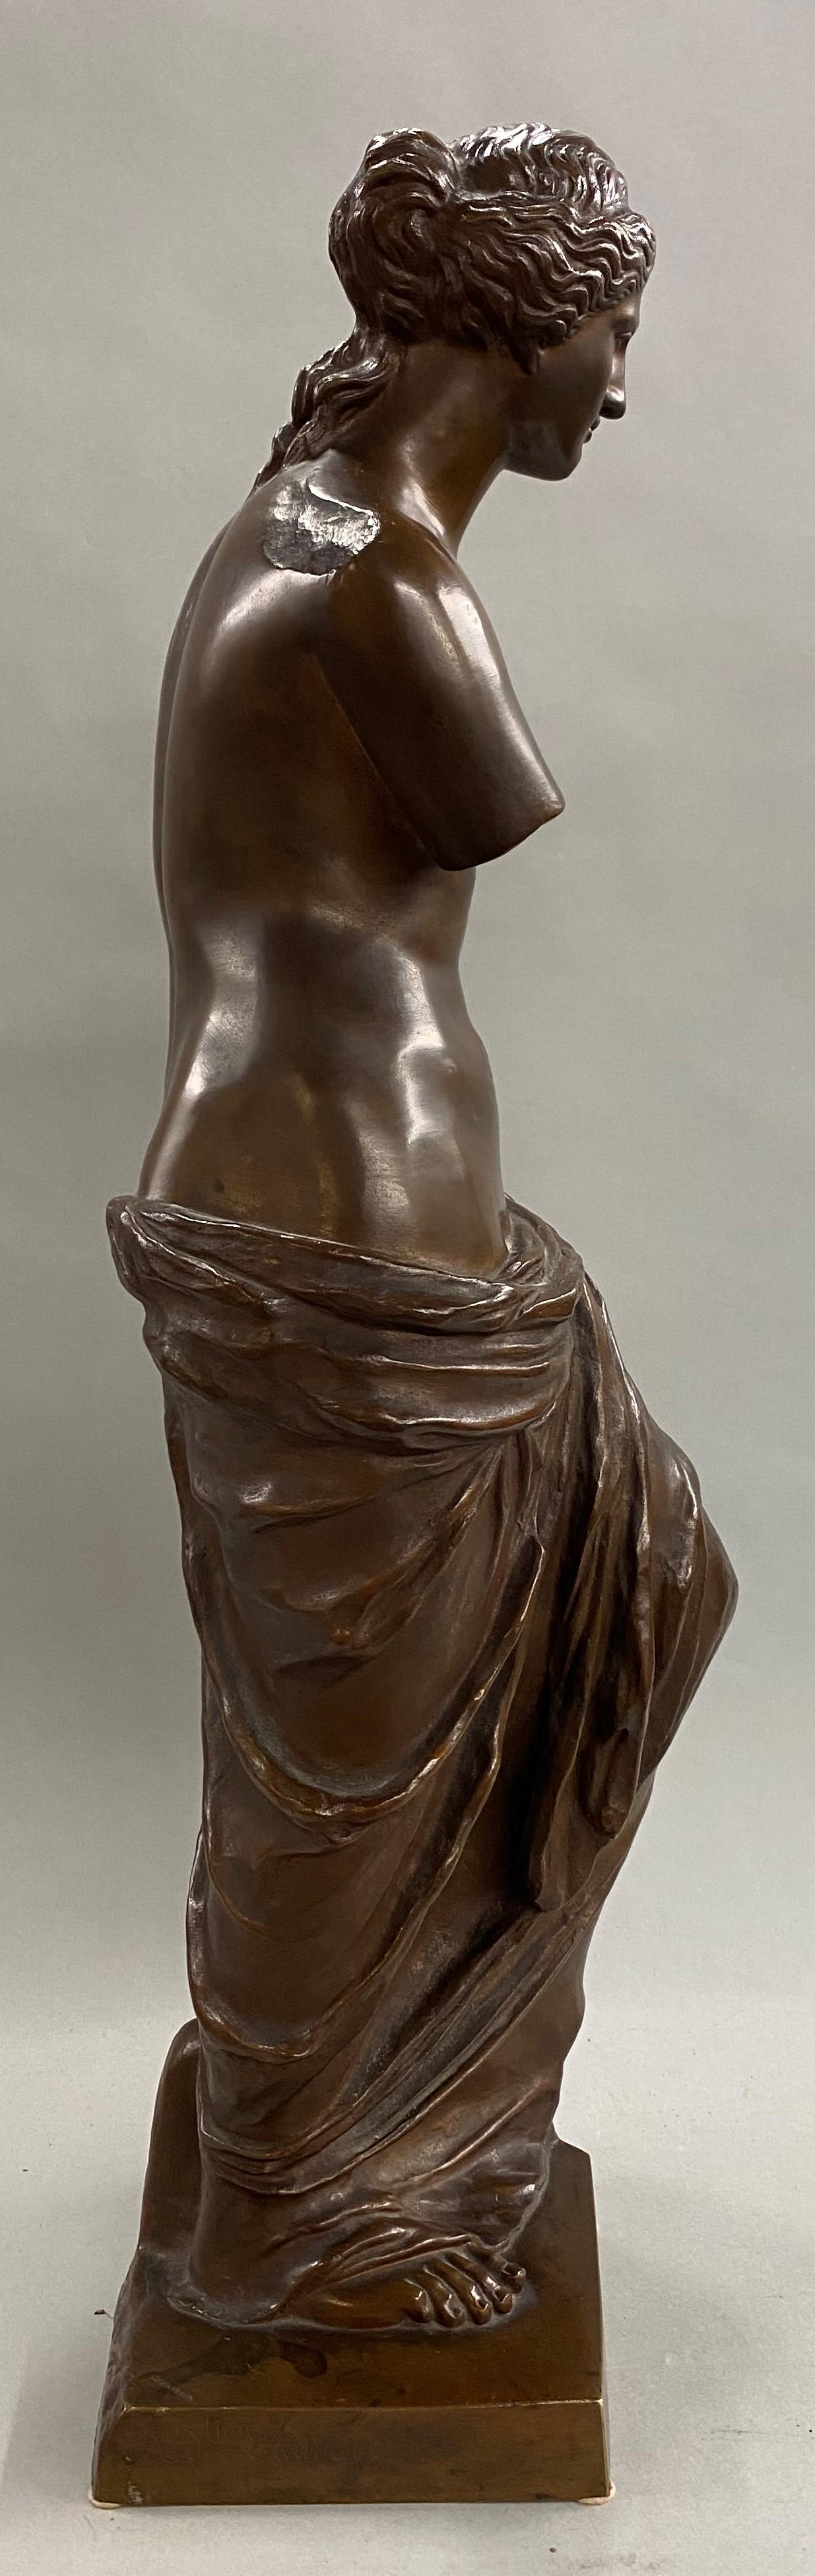 A fine patinated bronze of the iconic classic Greek statue of Venus de Milo, incised by artist on base side (possibly 19th century French sculptor Ron Liod Sauvage) and stamped “Tiffany & Co” on base top corner, dating the the late 19th century in